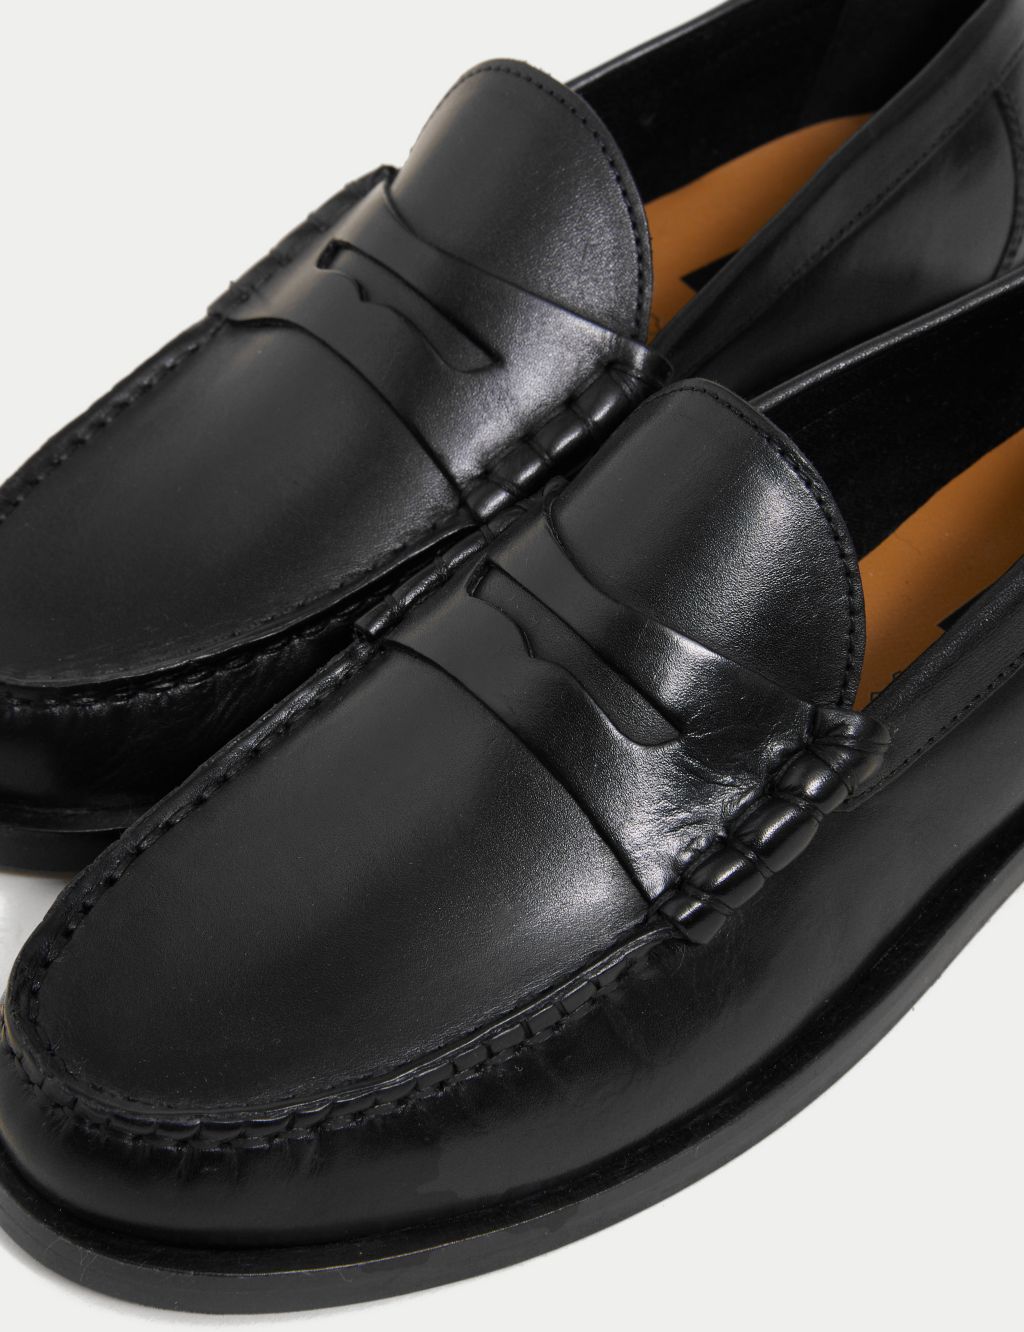 Leather Loafers image 4